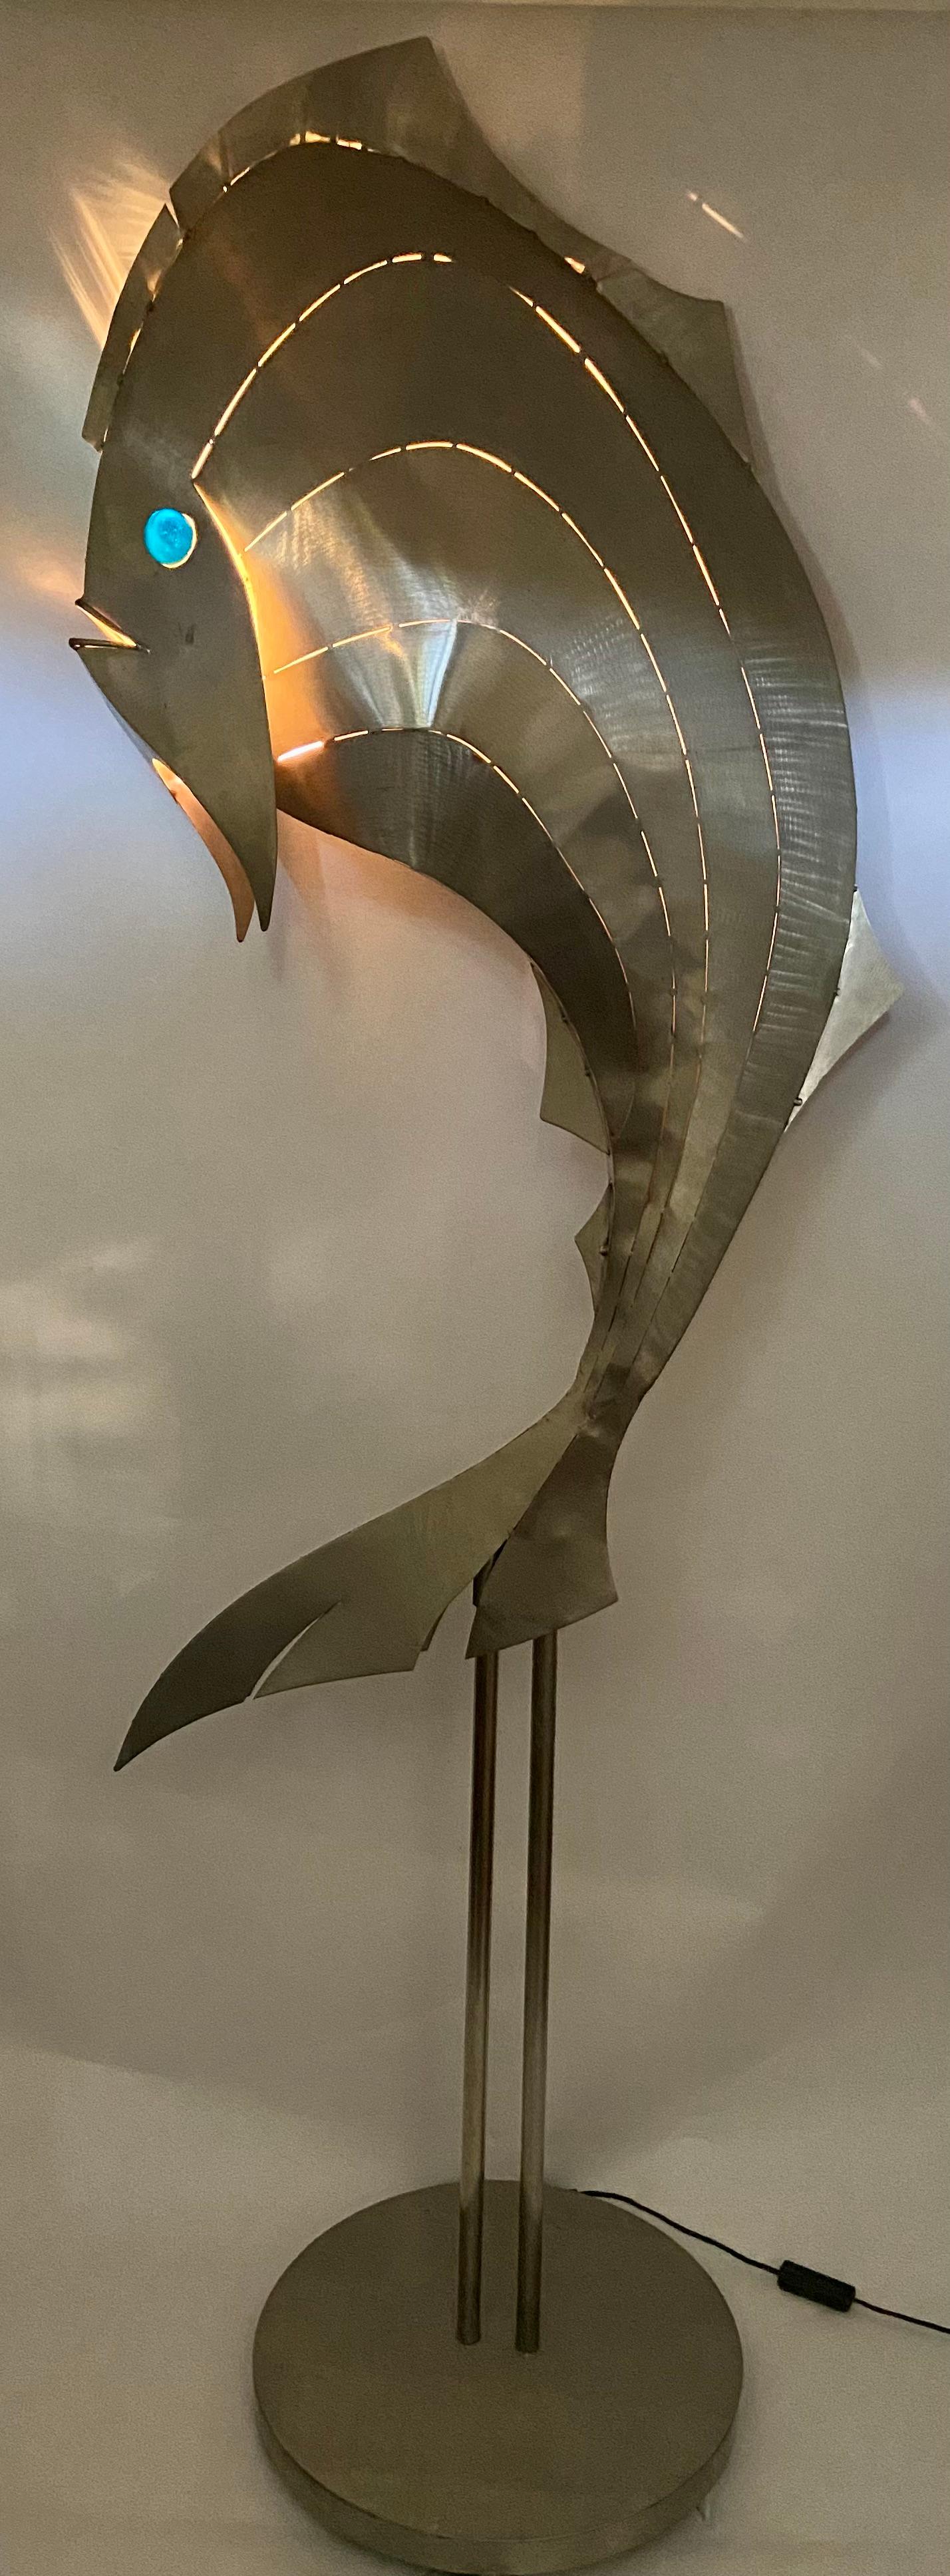 metal fish sculpture on stand